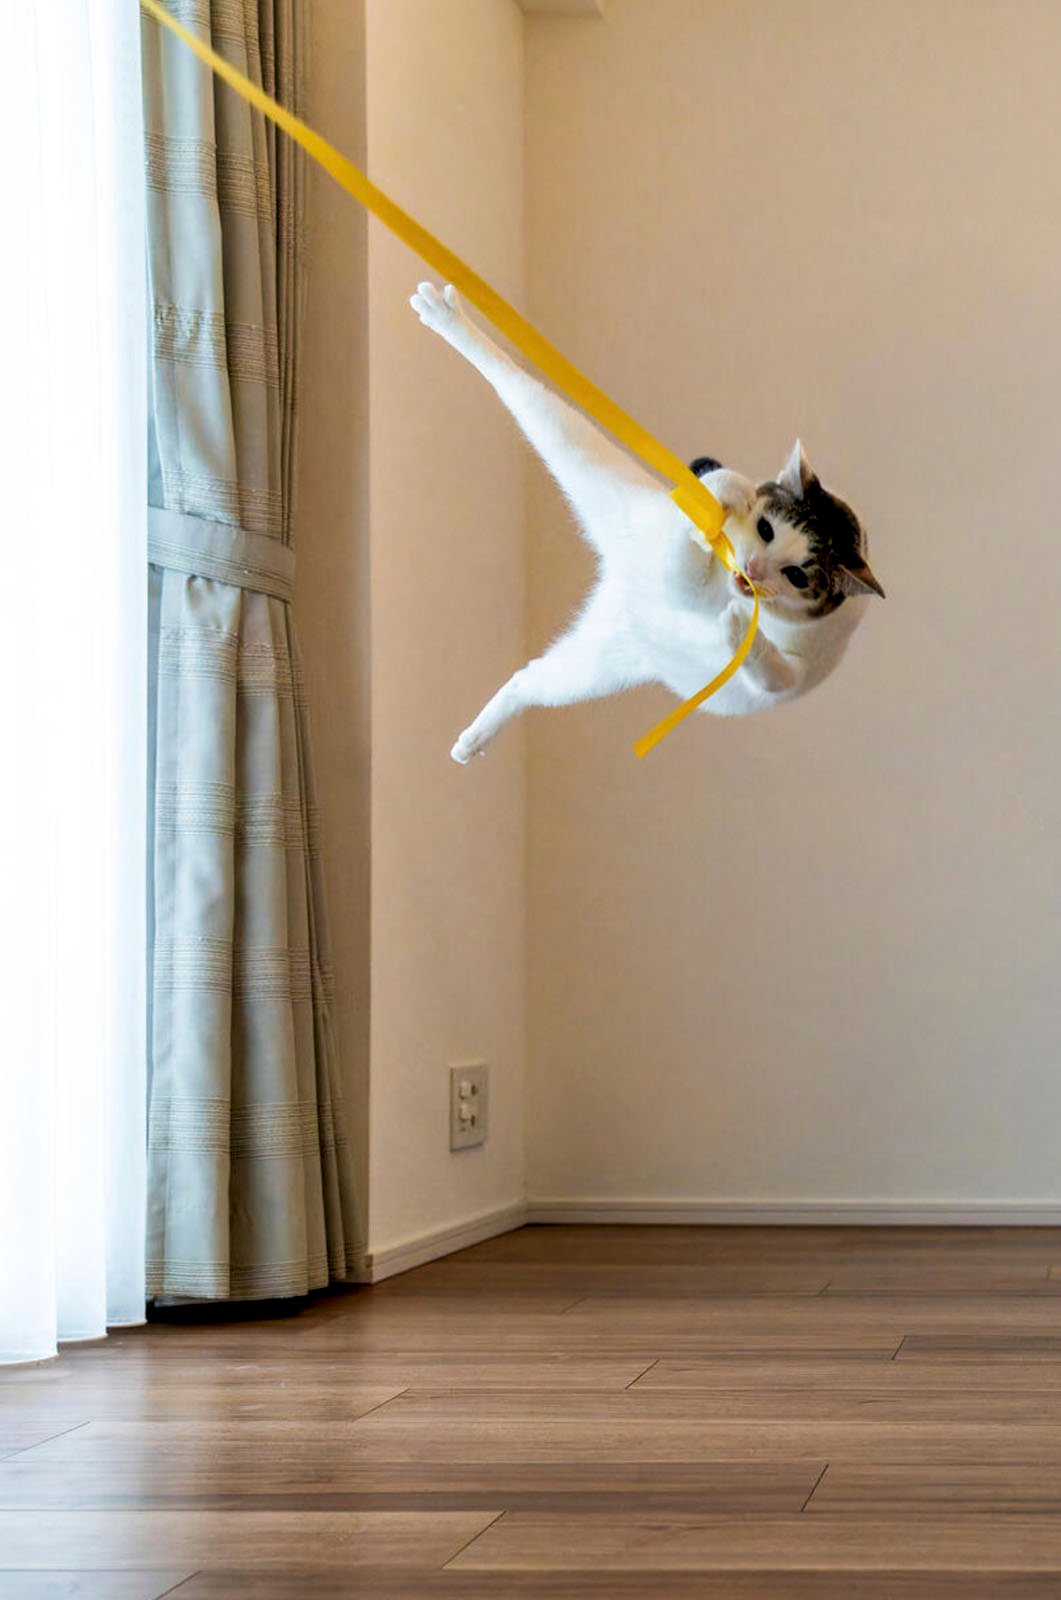 A cat leaping in mid-air to catch a yellow ribbon in a room with wood flooring and a light curtain. The cat is suspended horizontally, displaying agility.